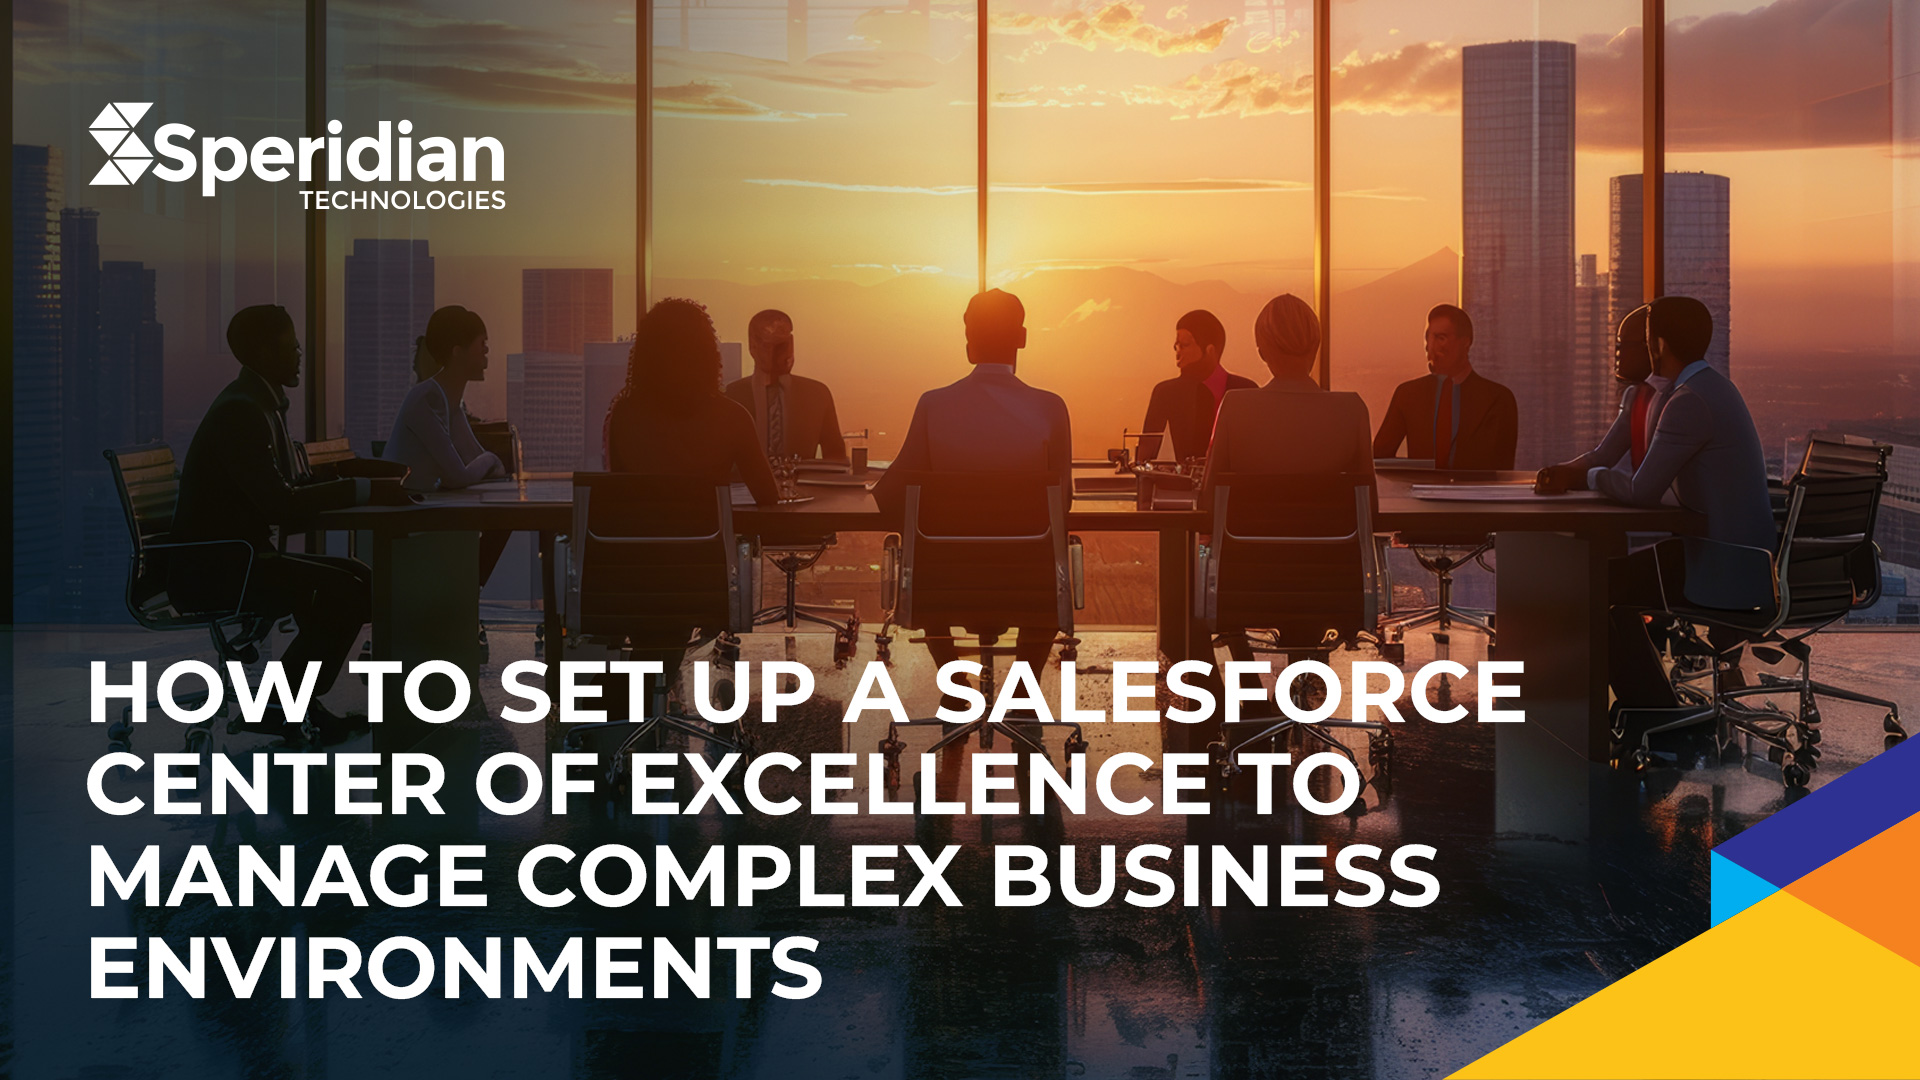 How to set up a Salesforce Center of Excellence to manage Complex Business Environments